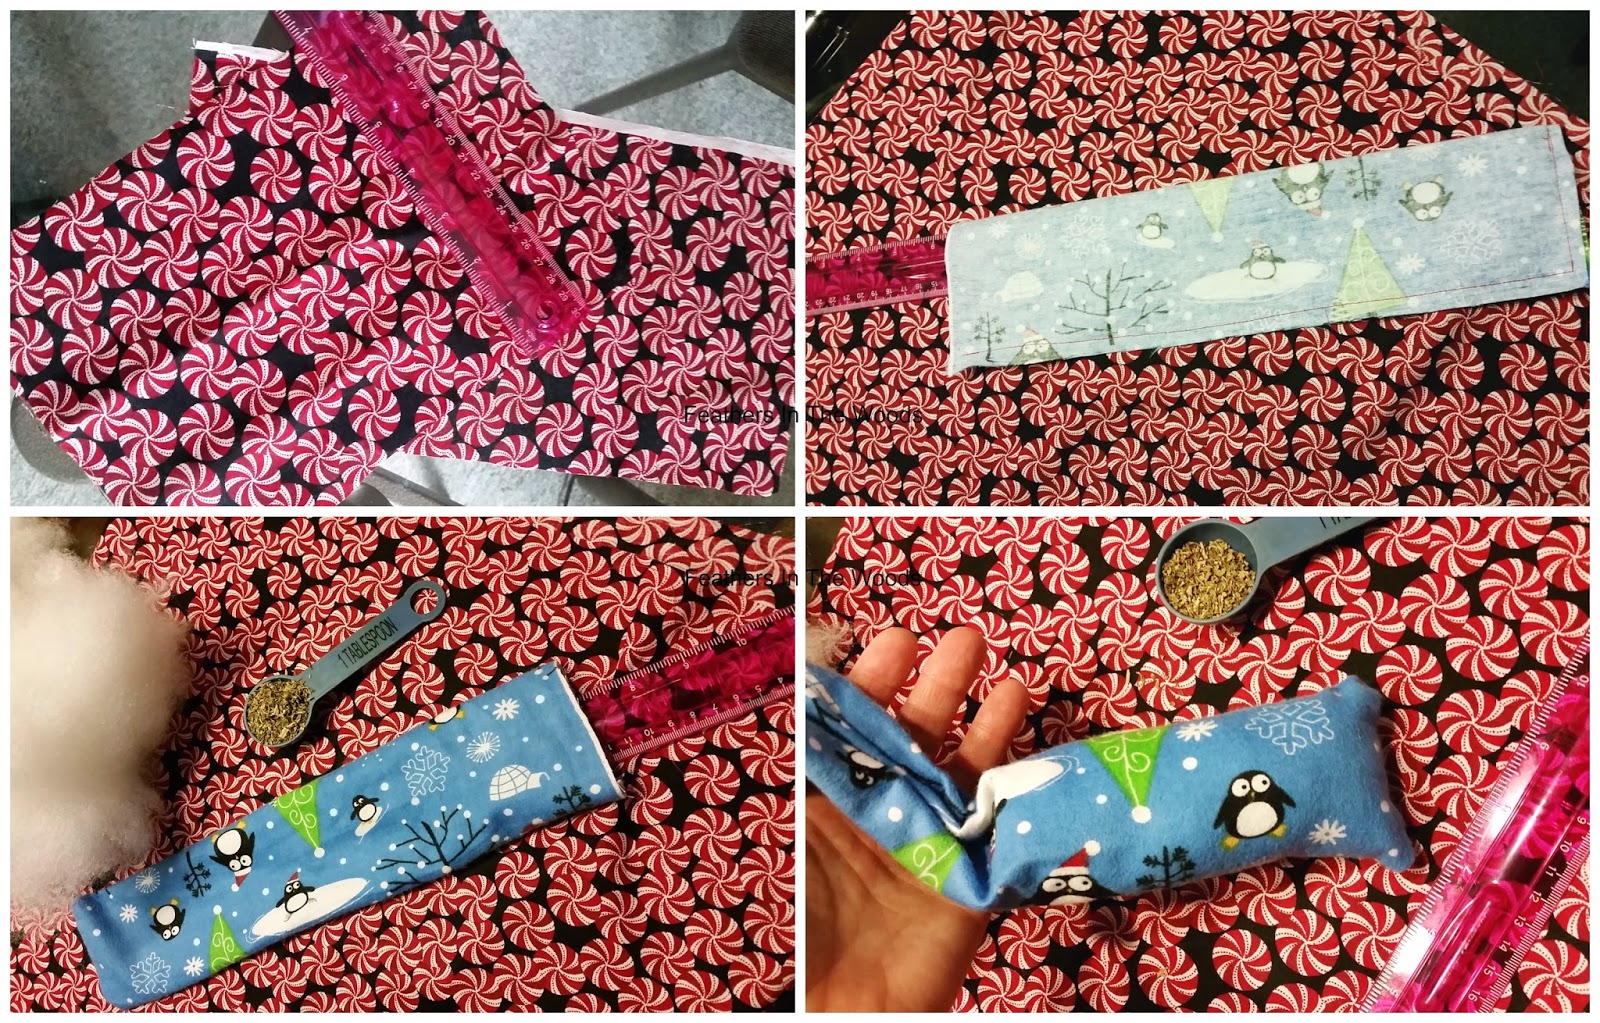 JUMBO Catnip kicker toy Stuffed with upcycled fabric scraps and lots and lots of cat nip!